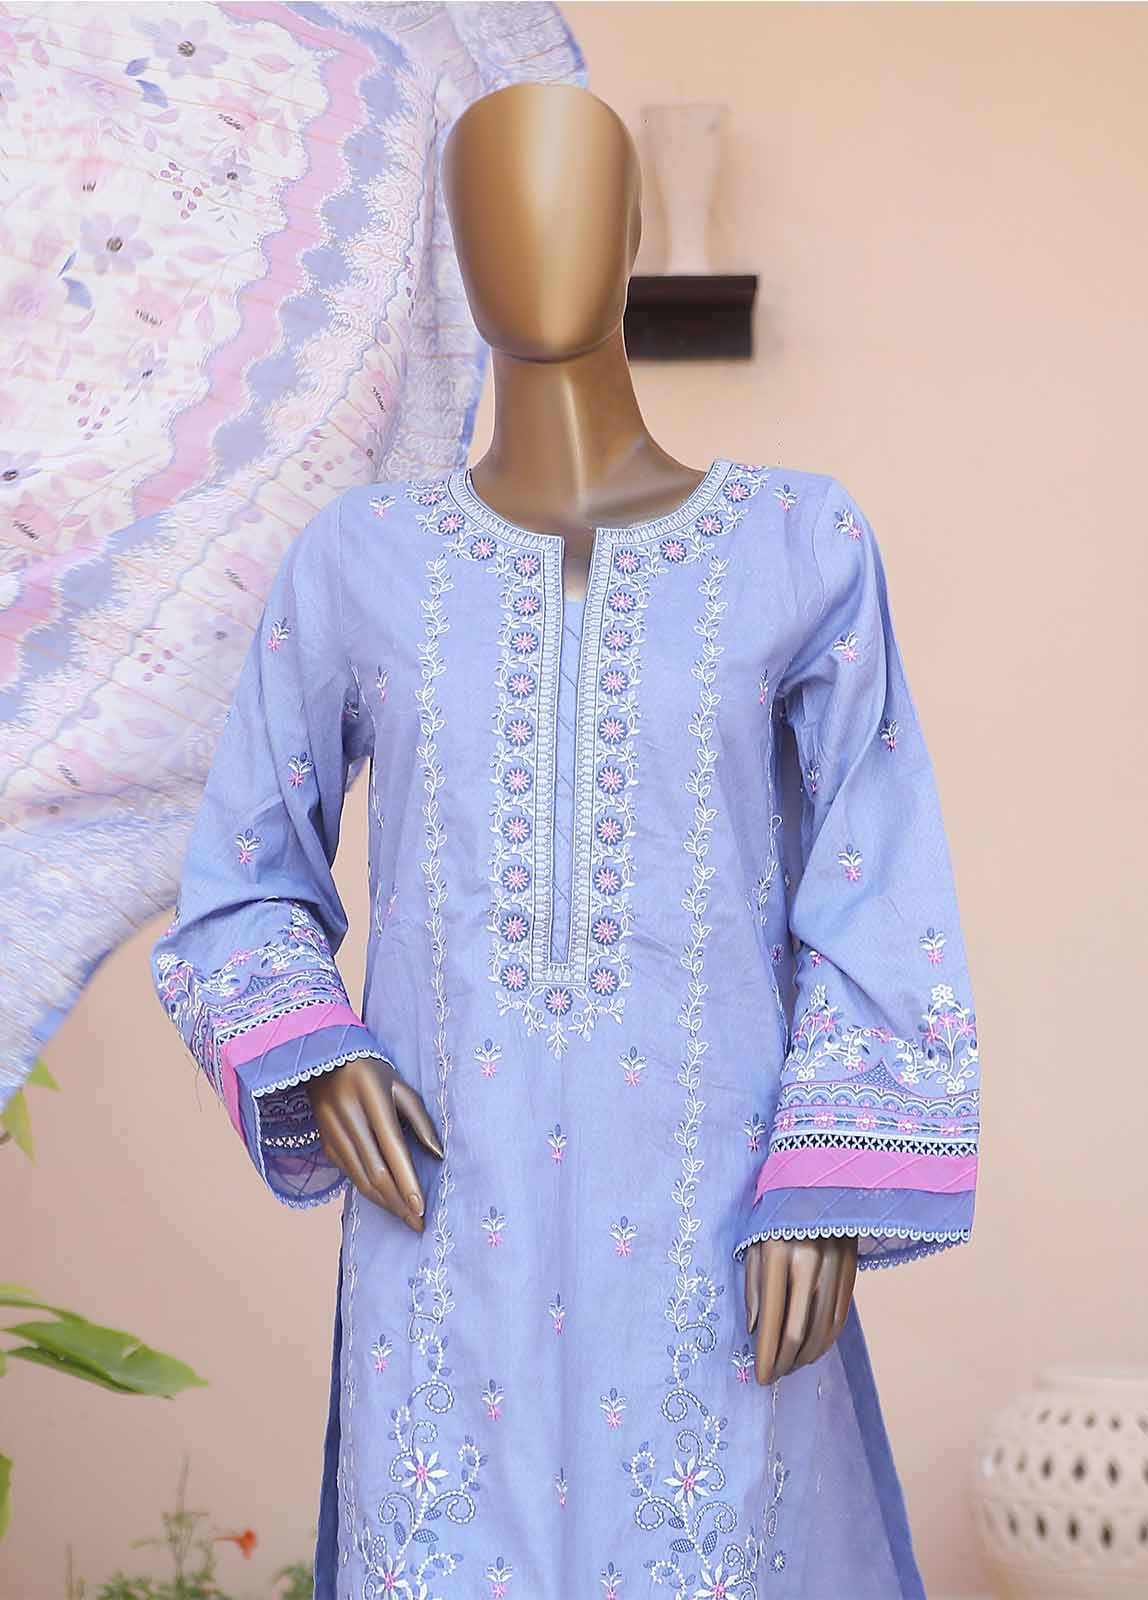 SMLF-CE-434-3 Piece Cotton Embroidered